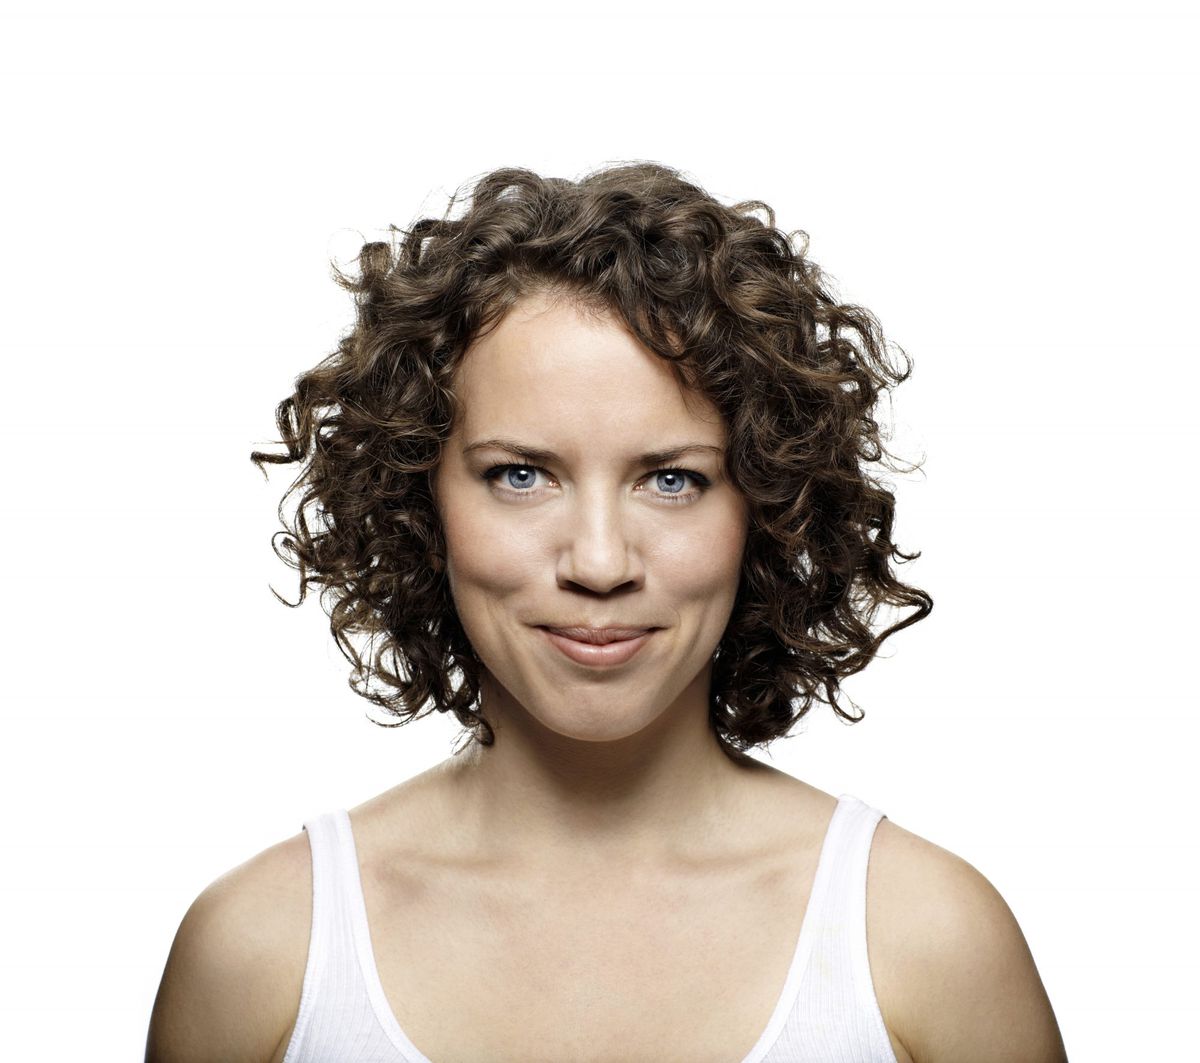 Woman with Short Brown Curly Hair